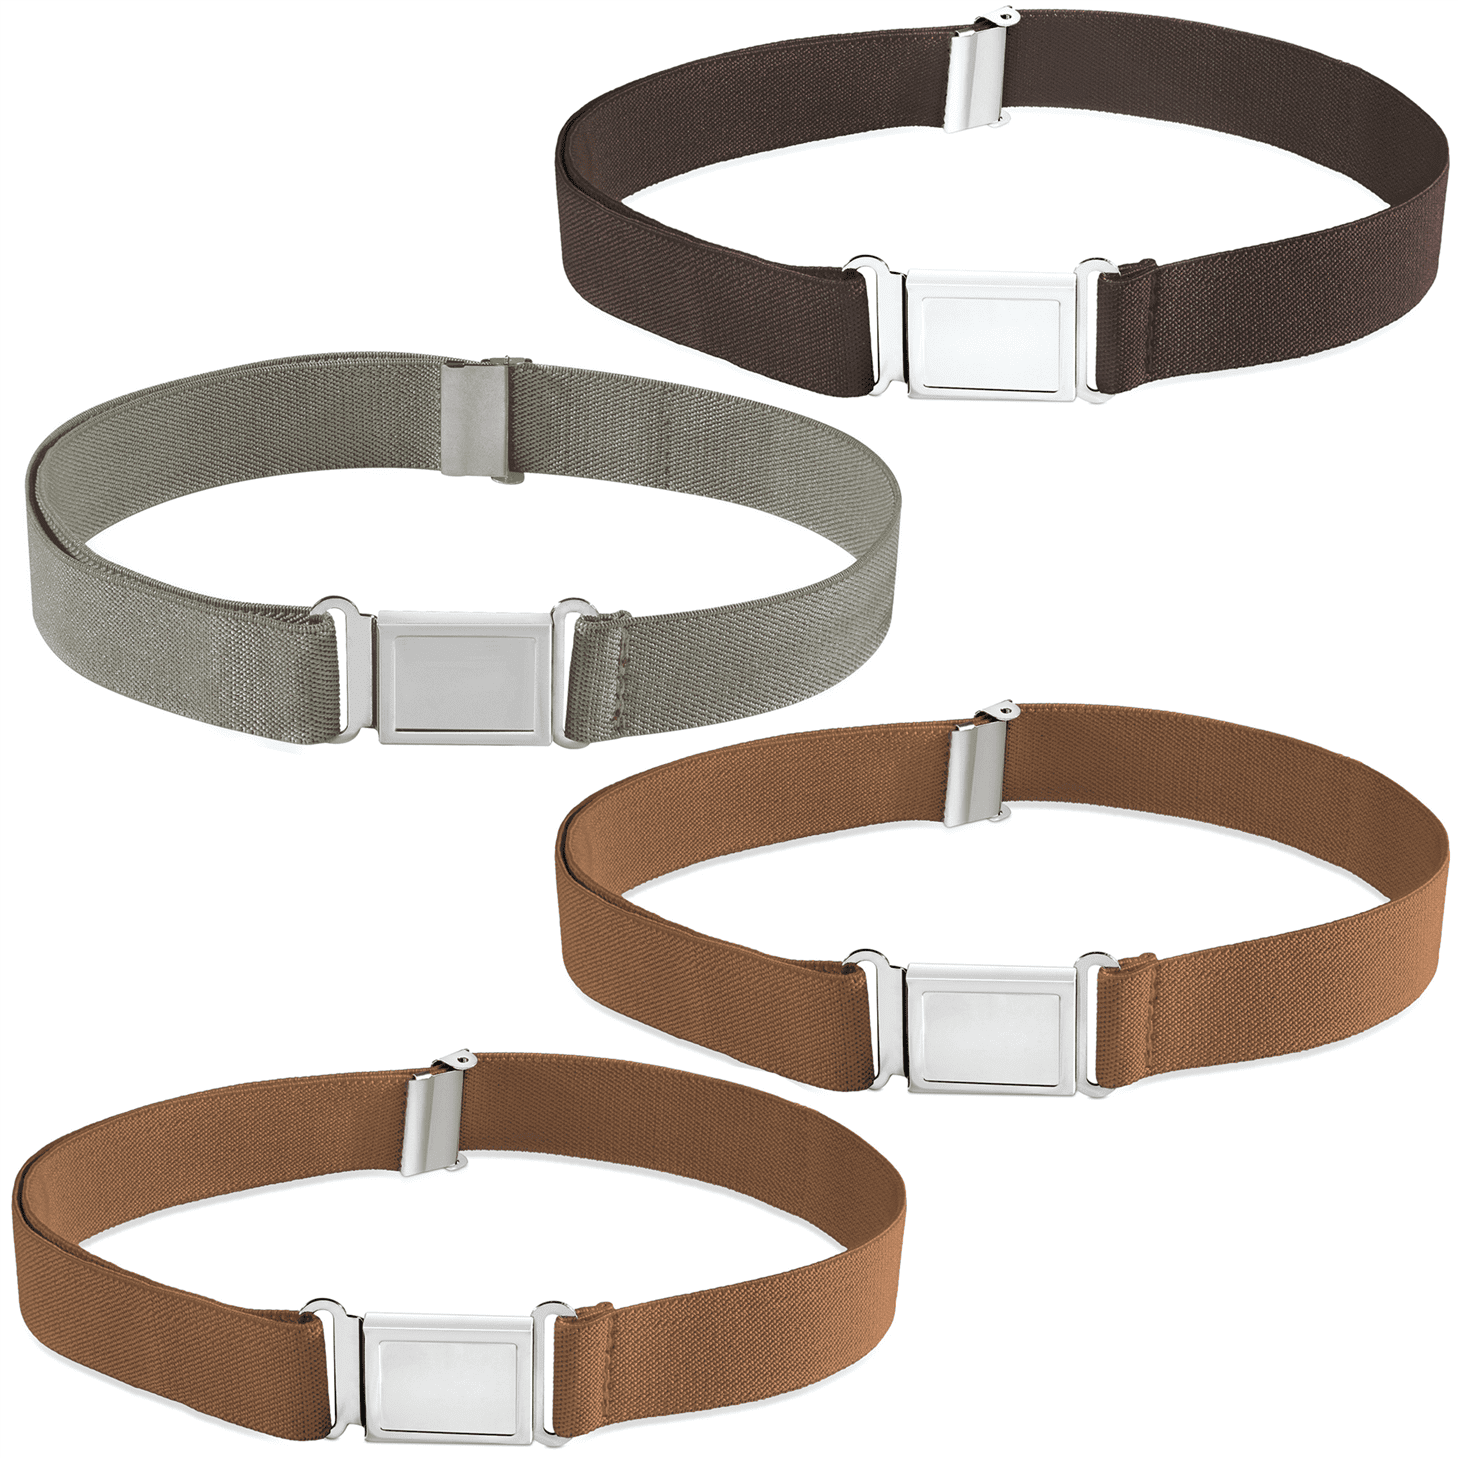 Buyless Fashion Kids Boys Toddler Adjustable Elastic Stretch Belt With Buckle 4 Pack